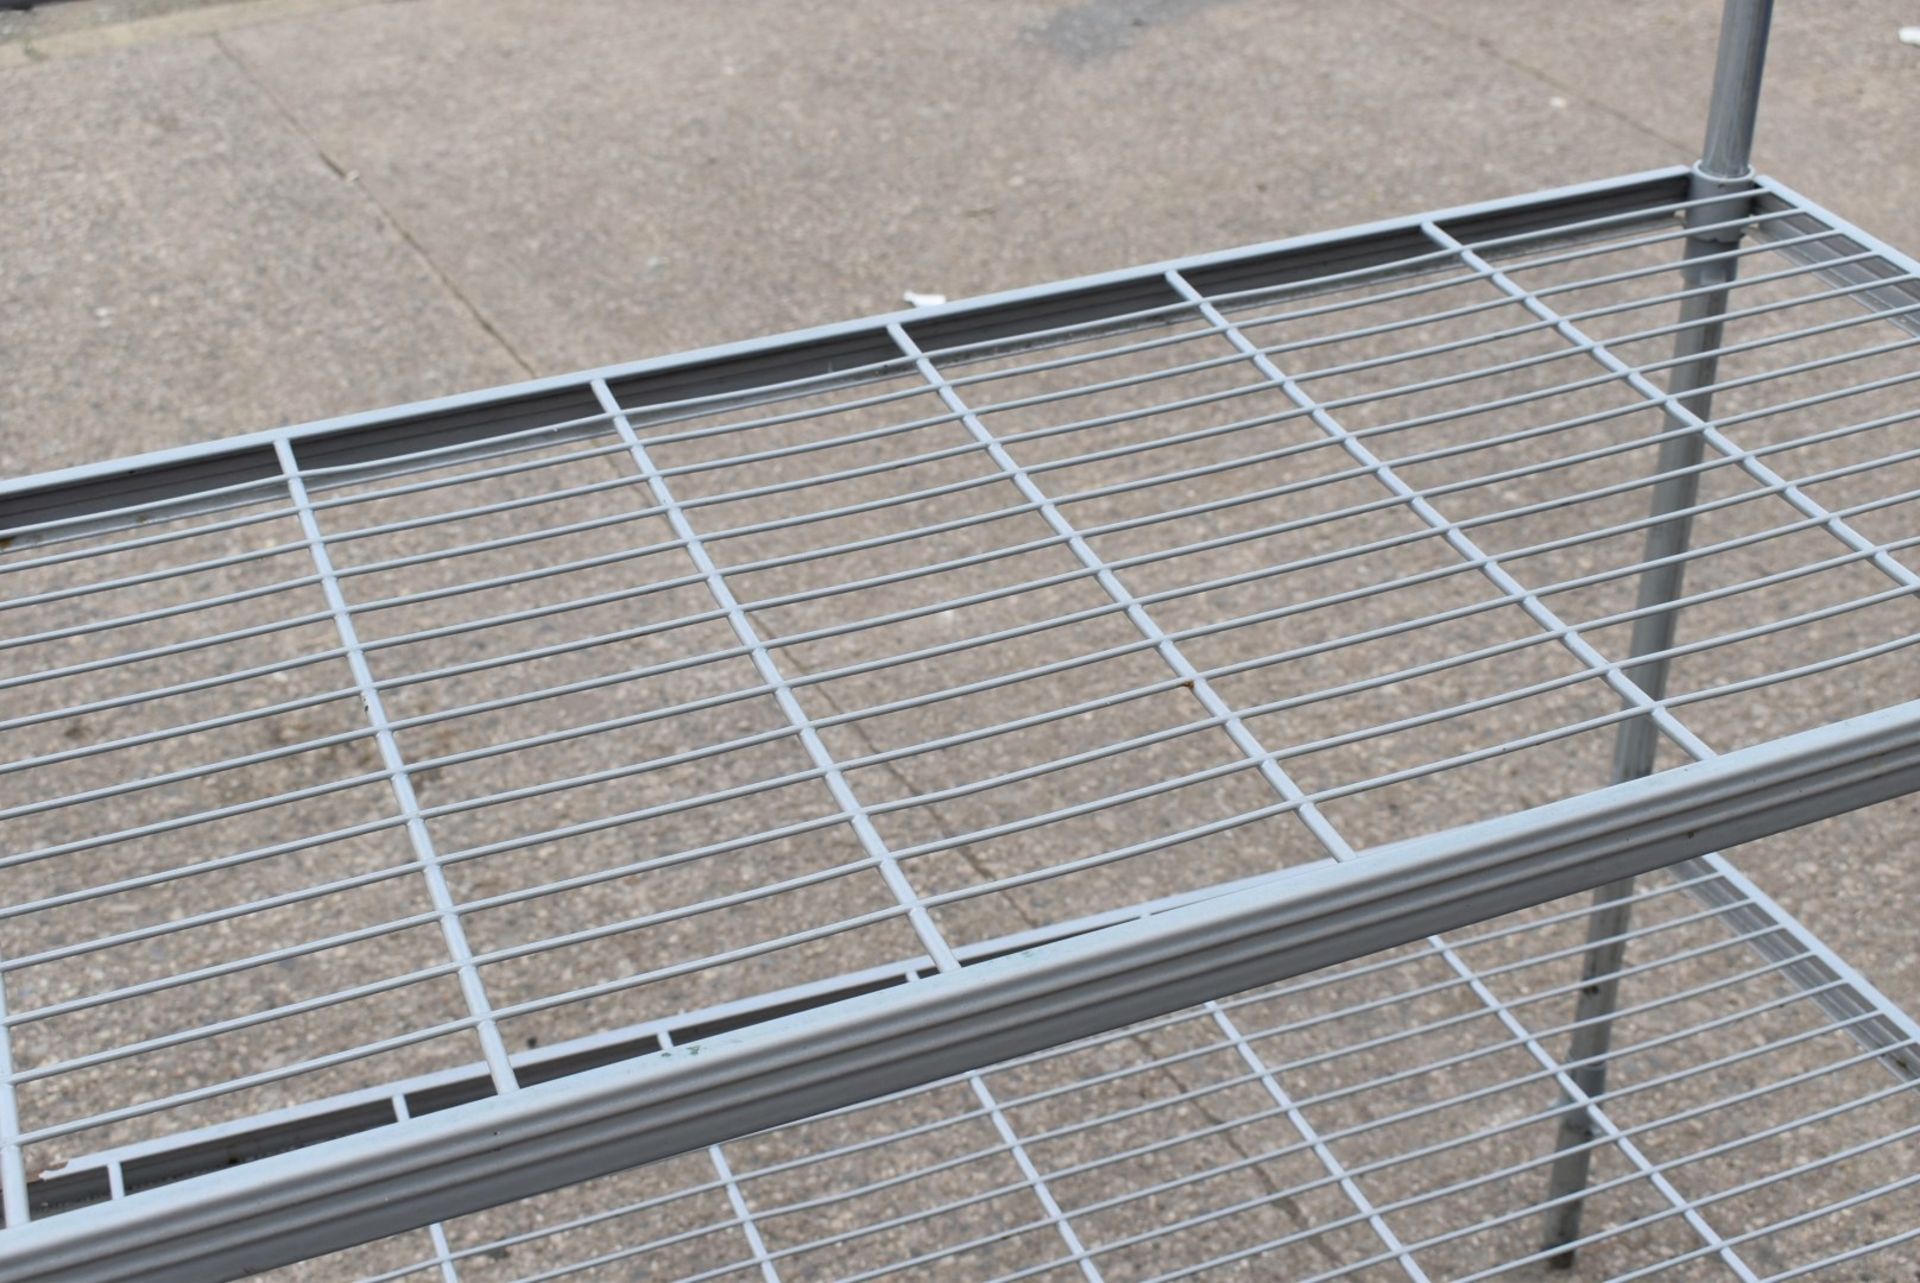 1 x Commercial Kitchen Coated Wire Shelf Rack - Dimensions: H170 x W116 x D49 cms - Recently Removed - Image 3 of 6